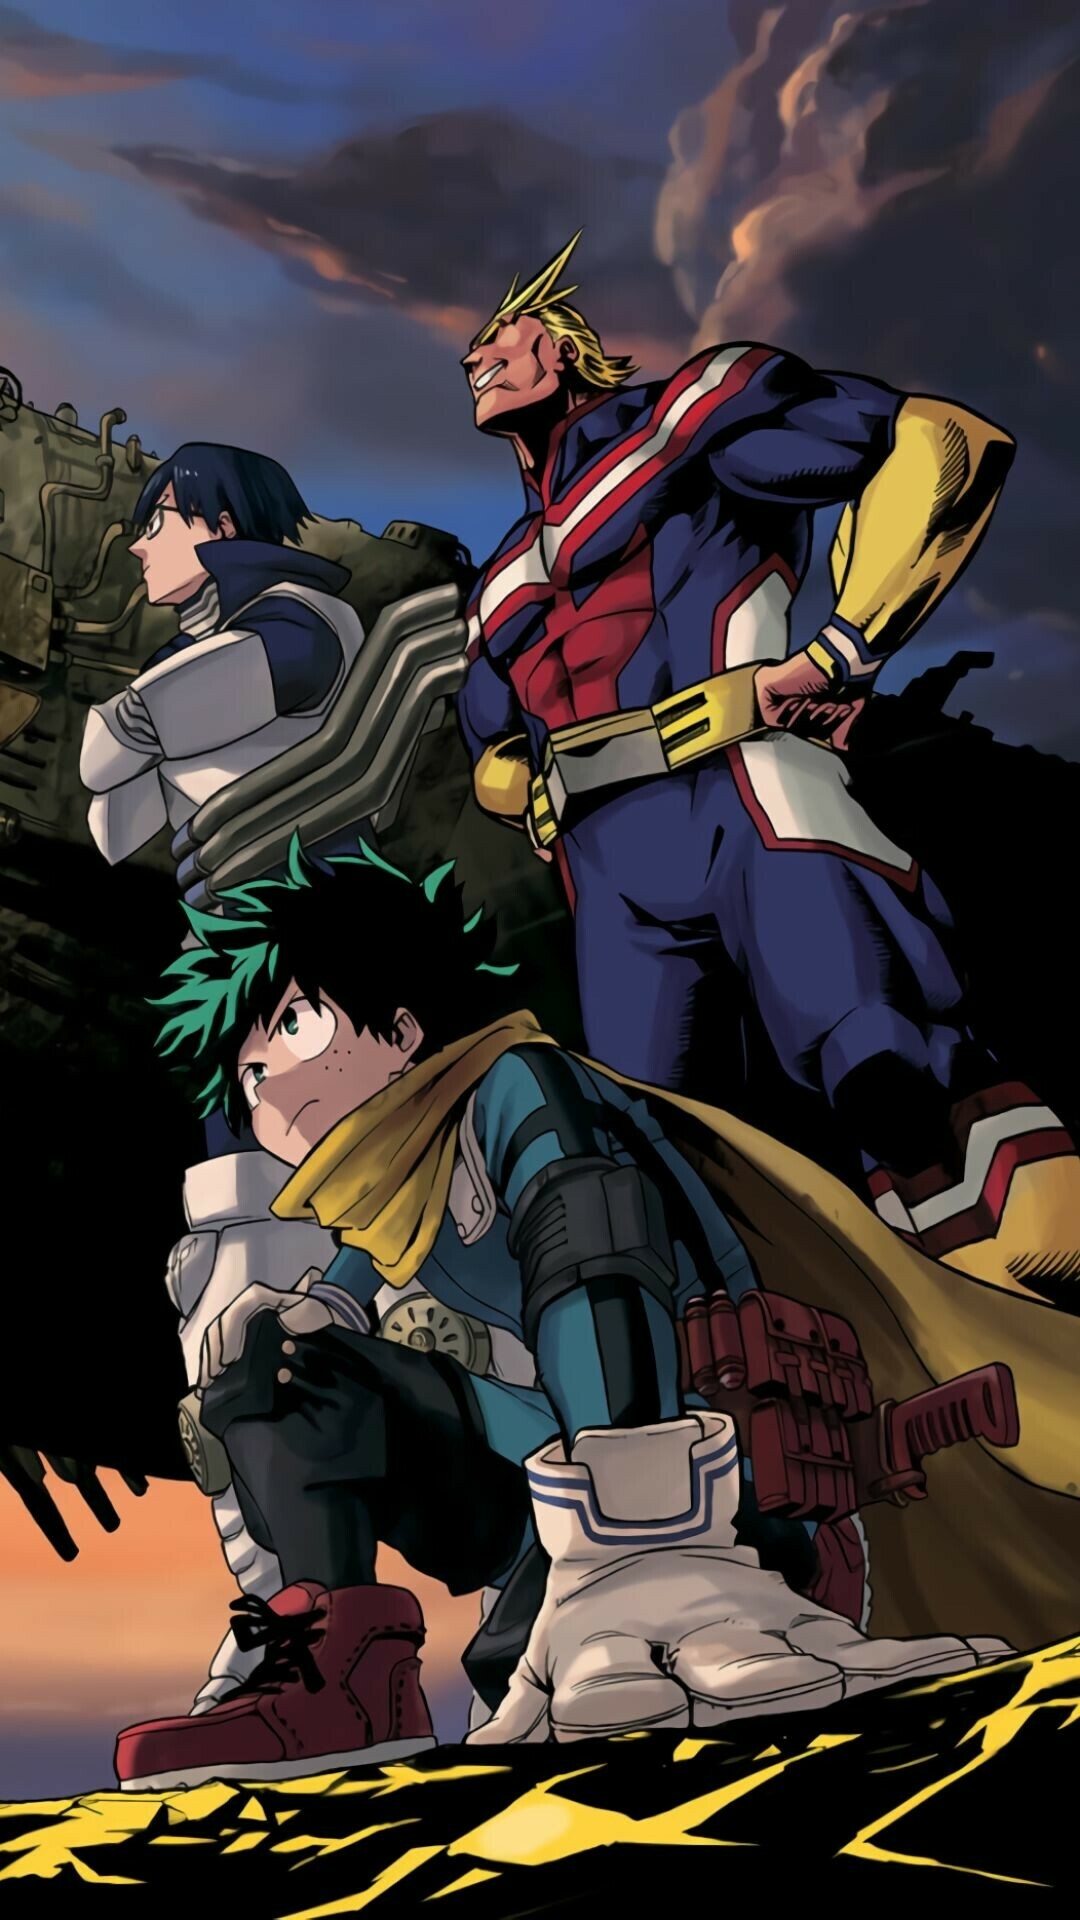 My Hero Academia: A world where most people have superpowers, Manga. 1080x1920 Full HD Wallpaper.